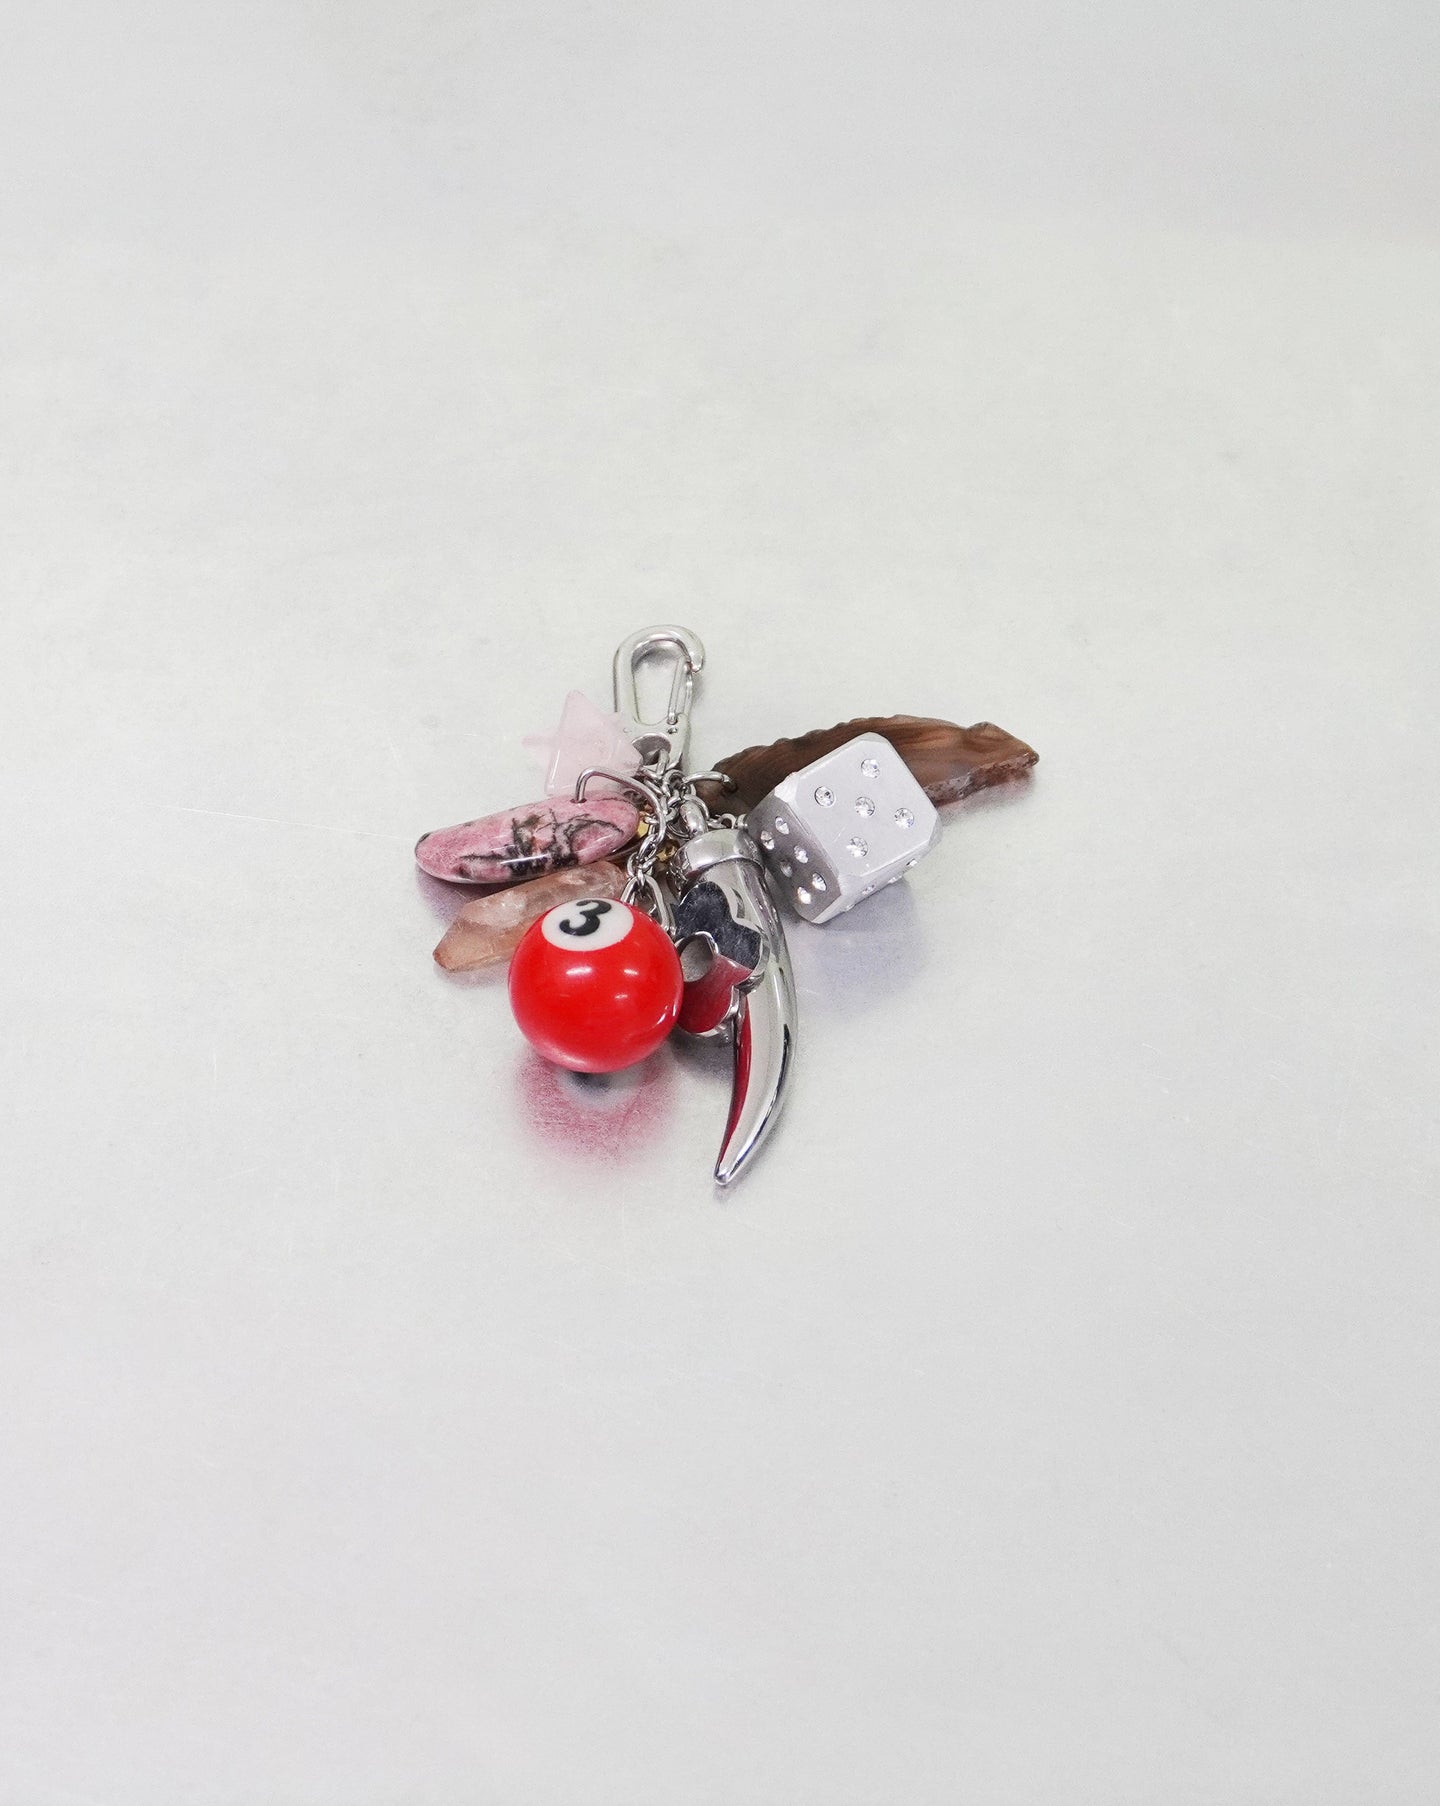 Marland Backus - Red Keychain with Pink Flower